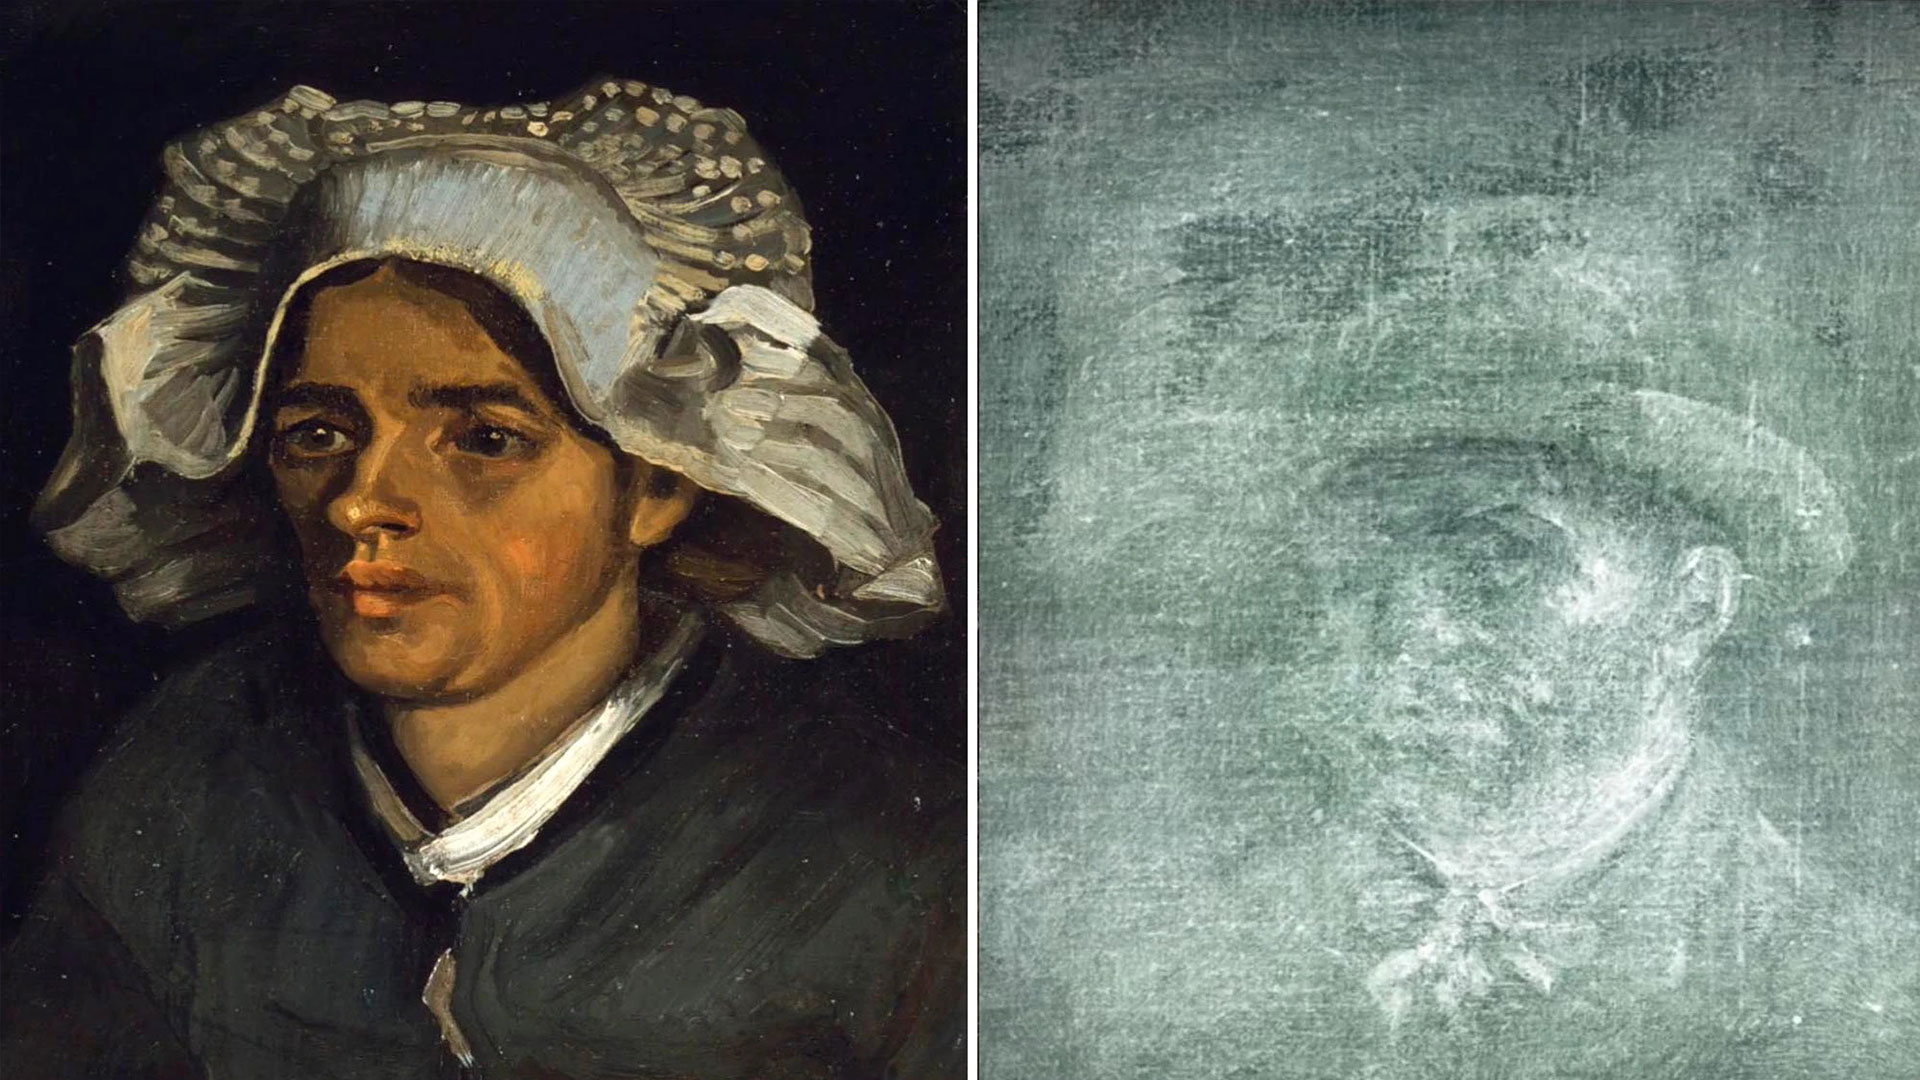  A new Van Gogh painting was discovered using an X-ray. NY post Photo Composite